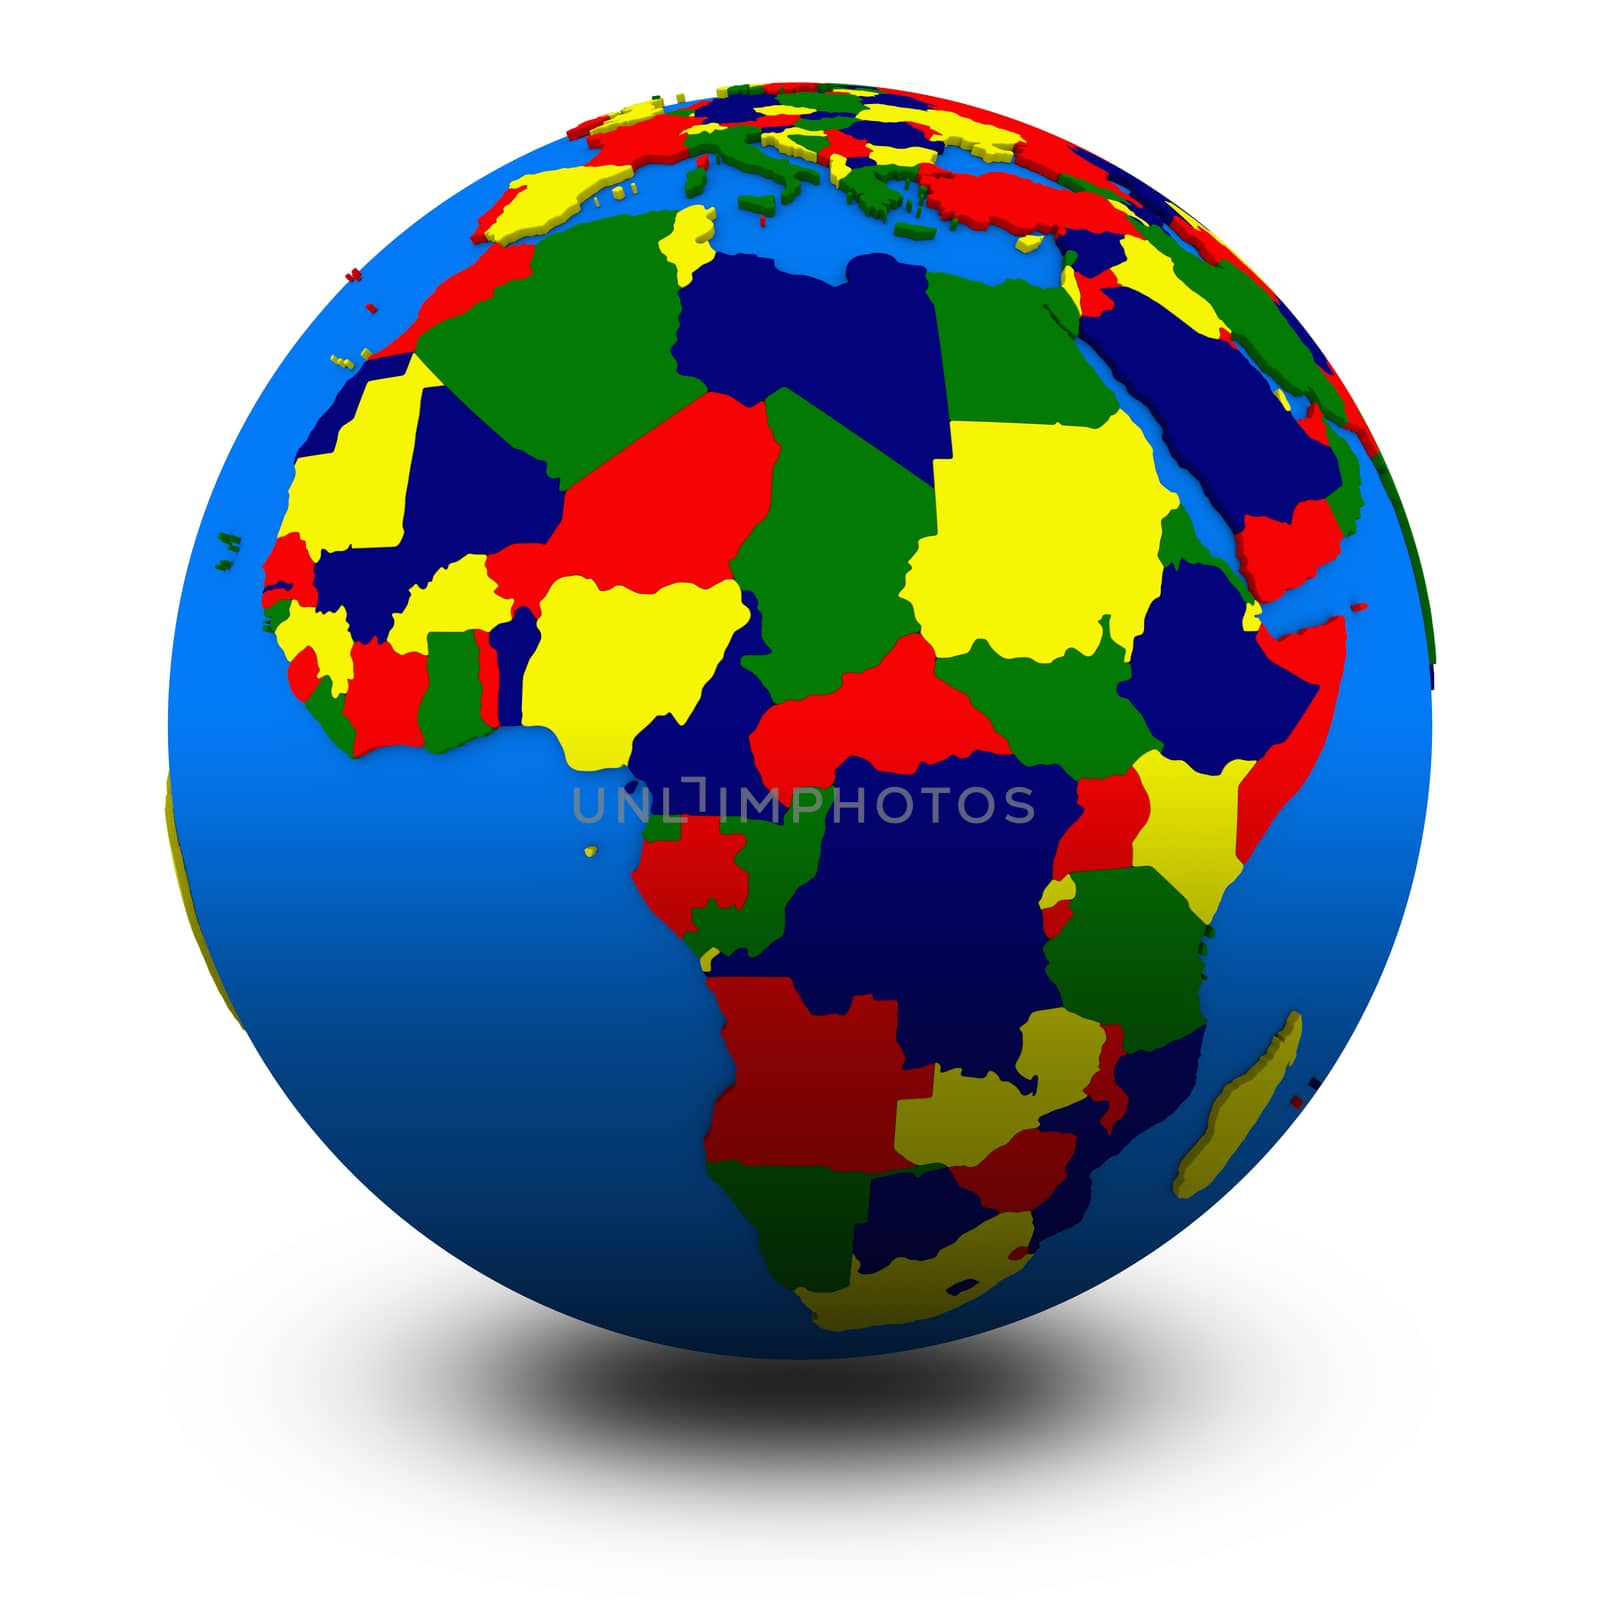 Africa on political globe illustration by Harvepino